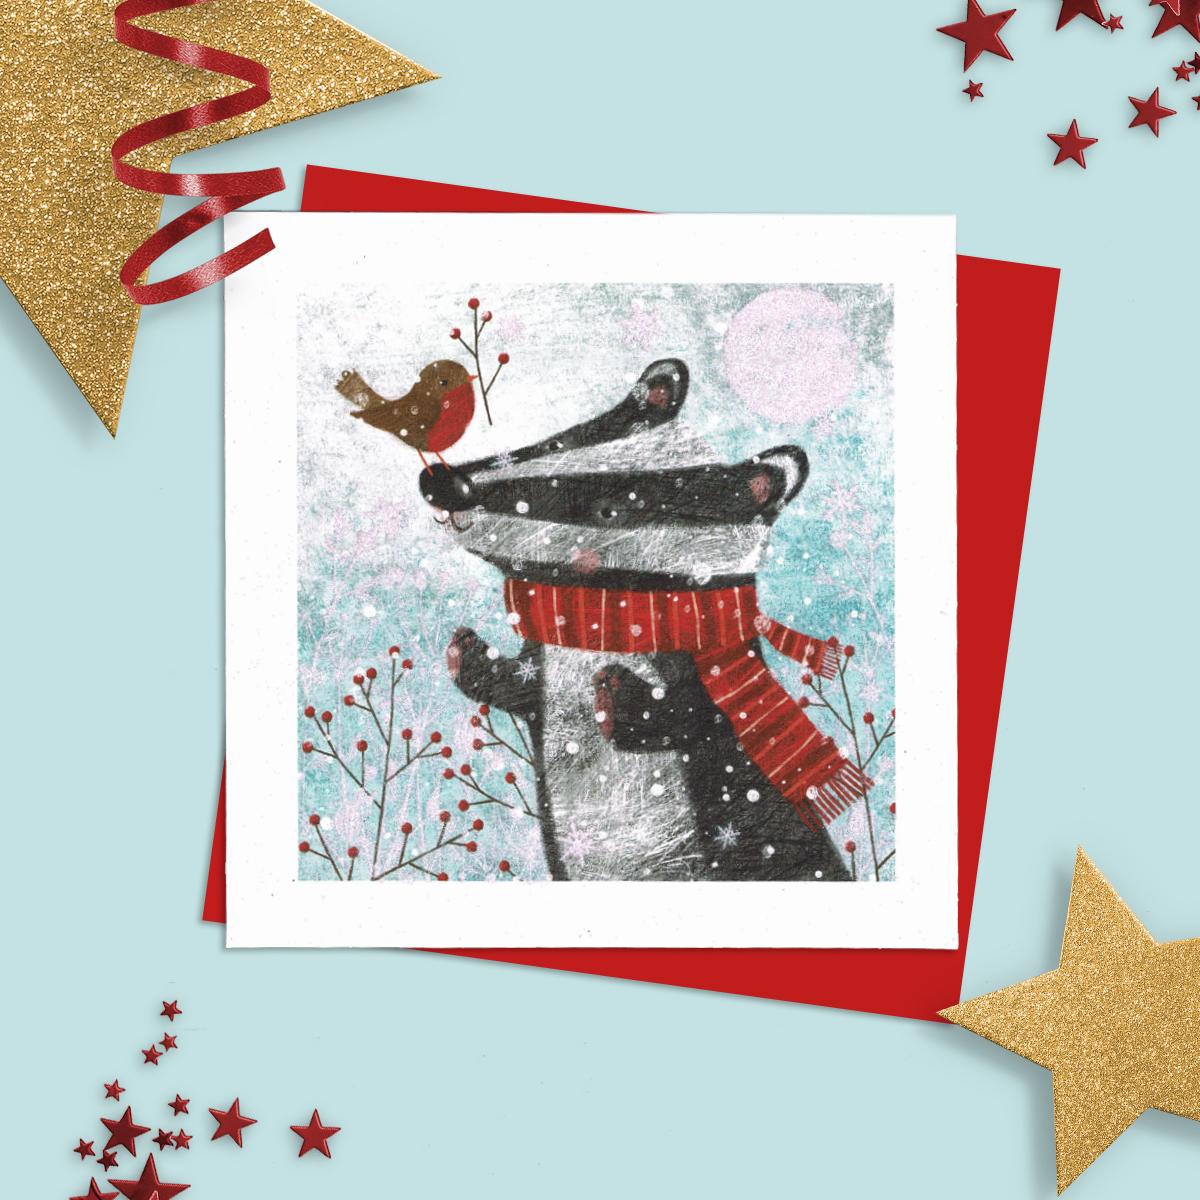 General Christmas Card Featuring A Badger In Scarf With Robin On His Nose! Added Sparkle And Red Envelope To Complete